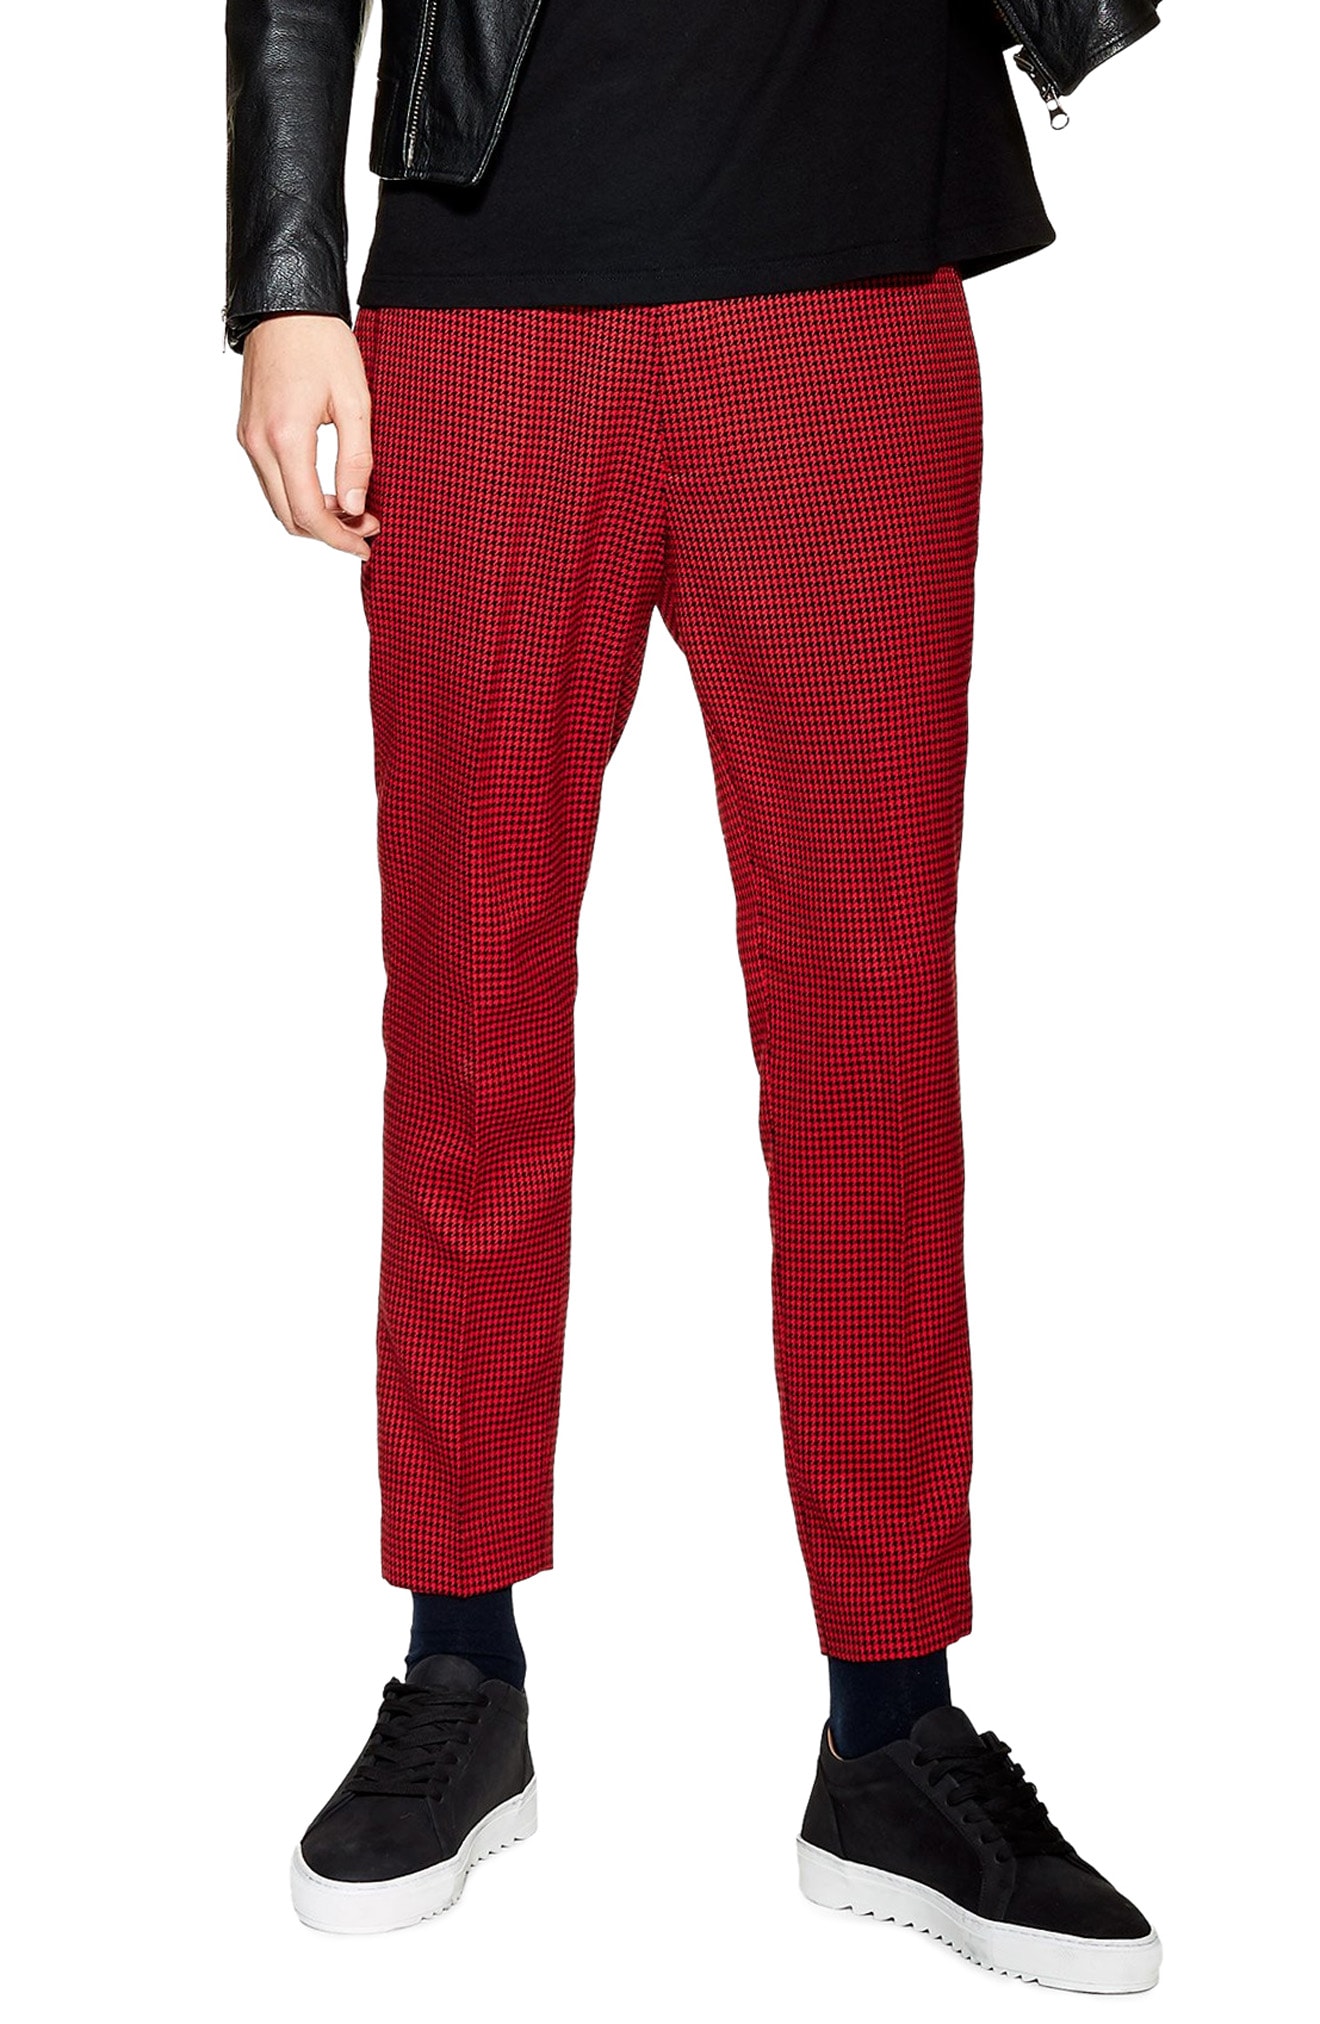 Men’s Topman Cropped Skinny Fit Houndstooth Trousers, Size 28 x 32 ...